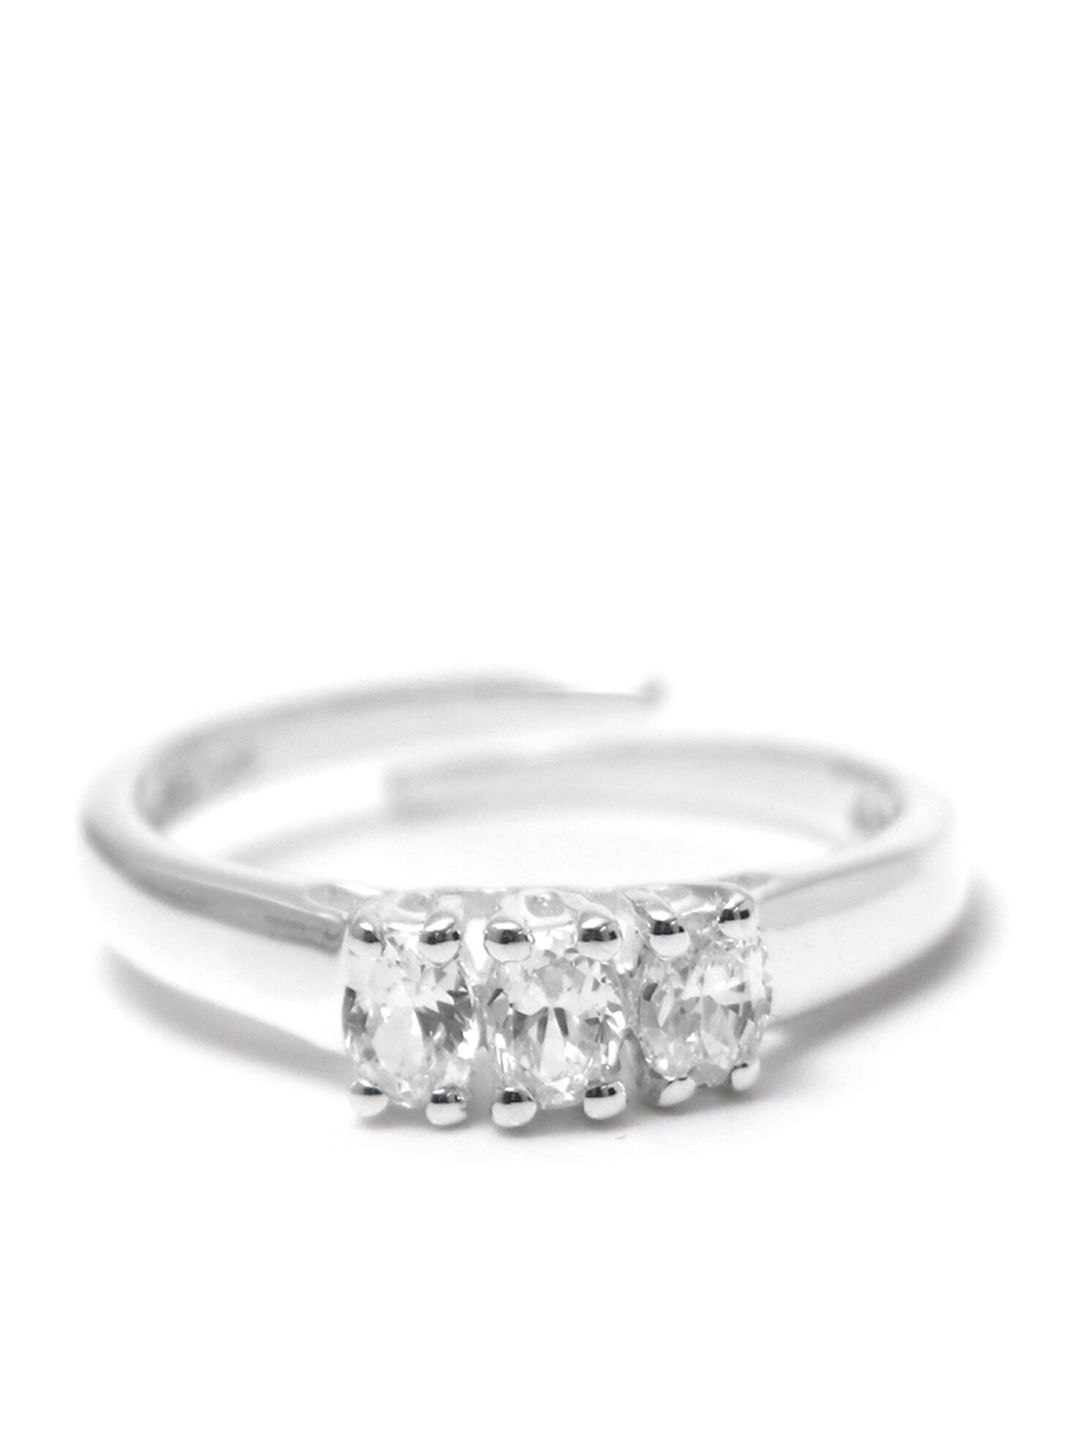 HIFLYER JEWELS Rhodium-Plated Silver-Toned & White CZ-Studded Finger Ring Price in India